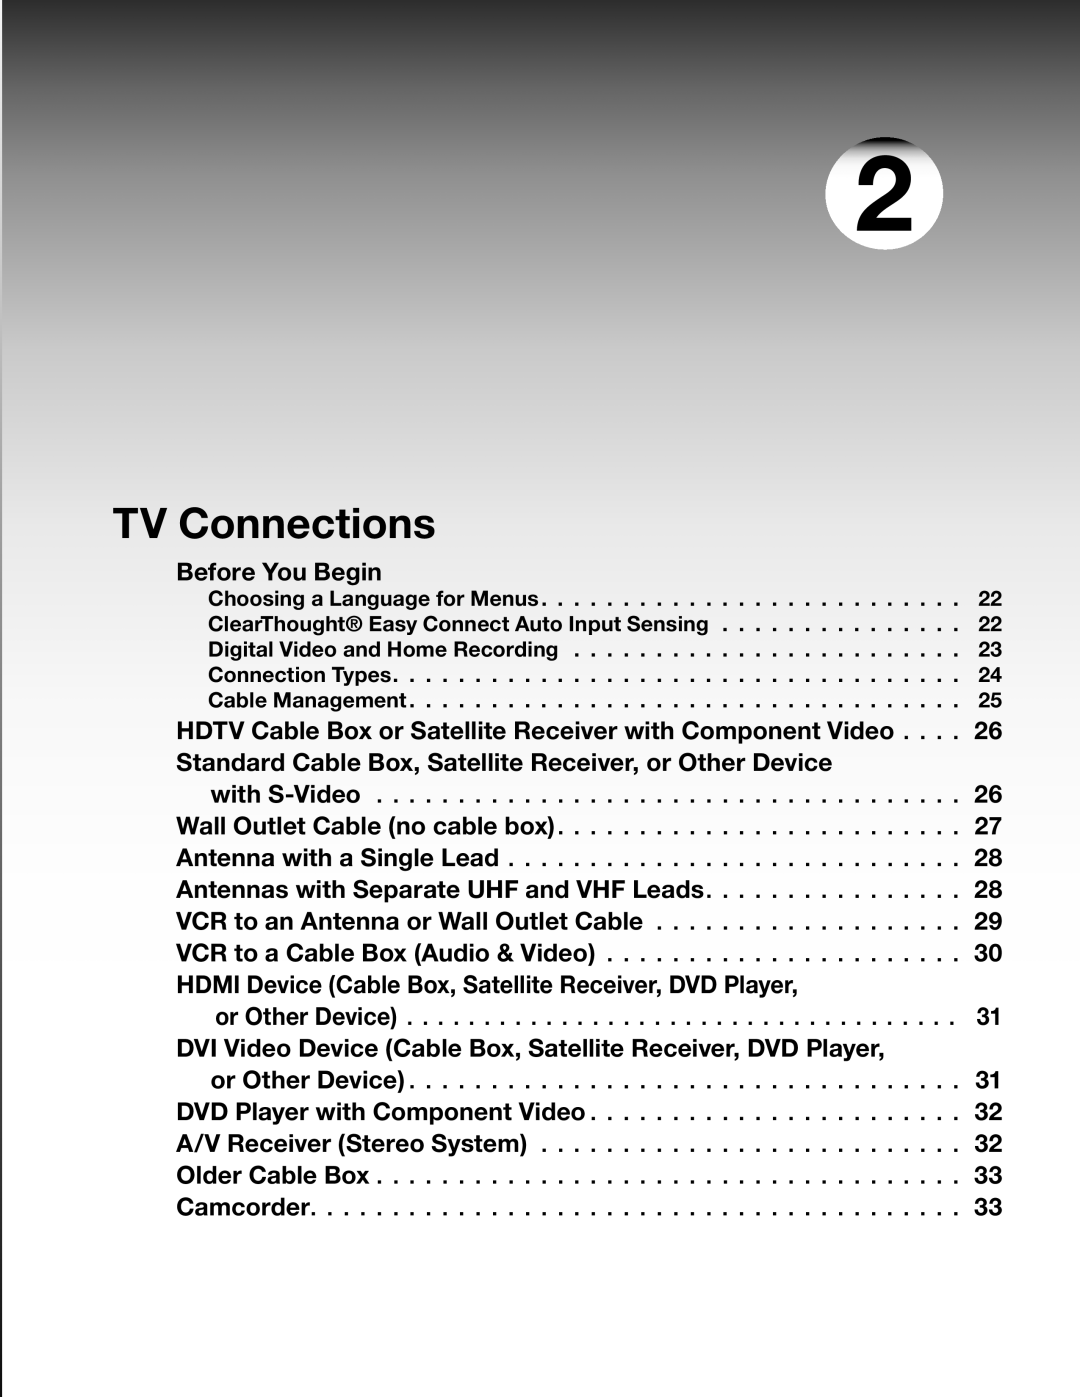 Mitsubishi Electronics LT-37131 manual TV Connections, Before You Begin 